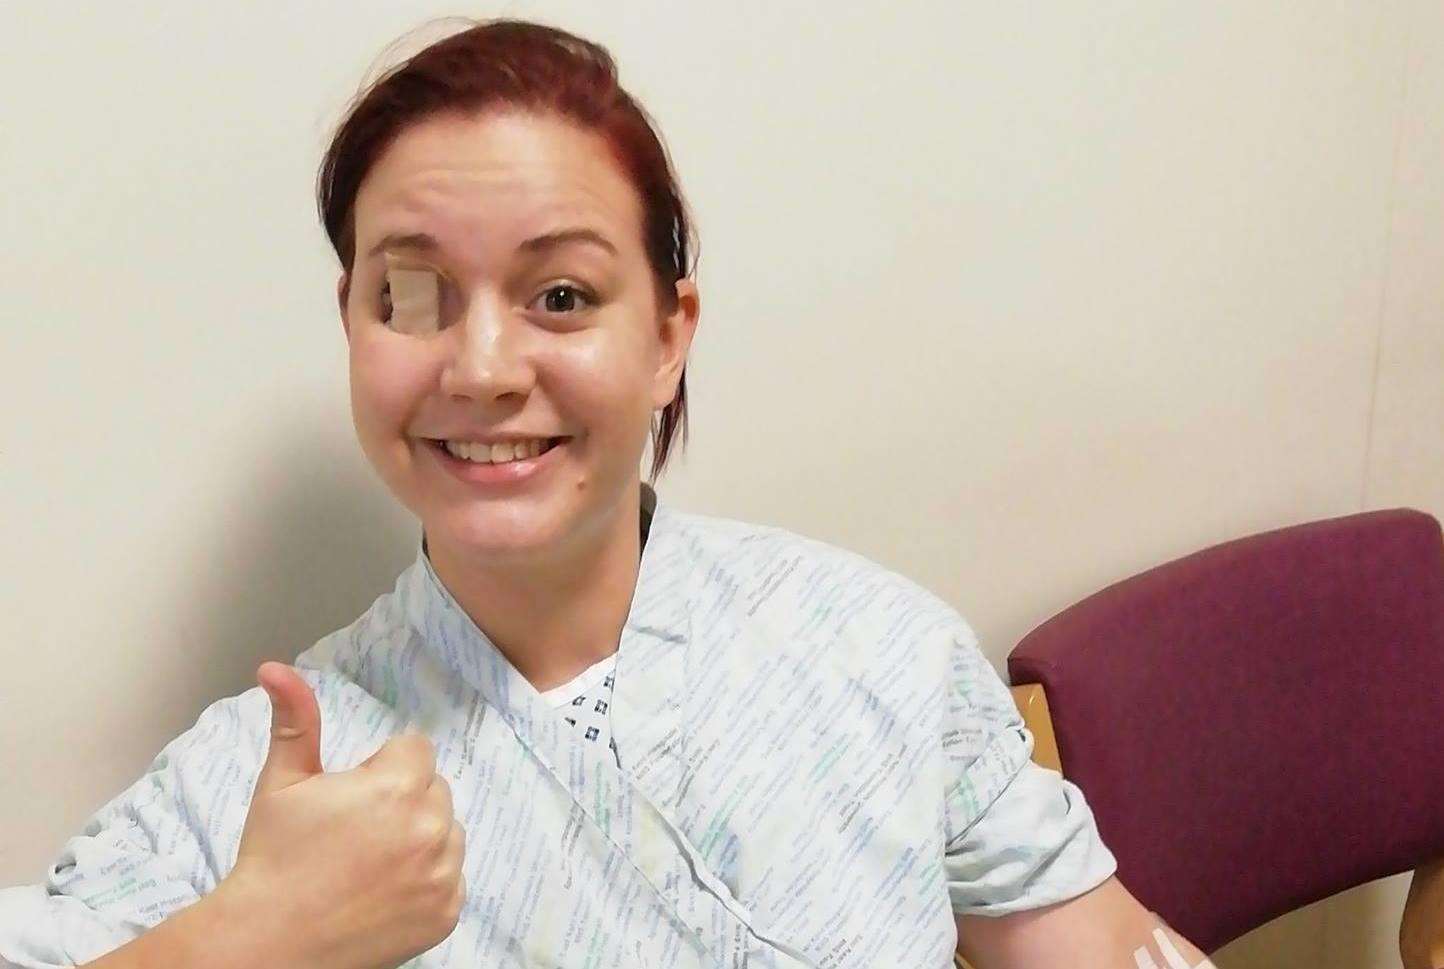 High spirits: Mum of two Toni Crews says her scars are the reason she's alive (7112490)